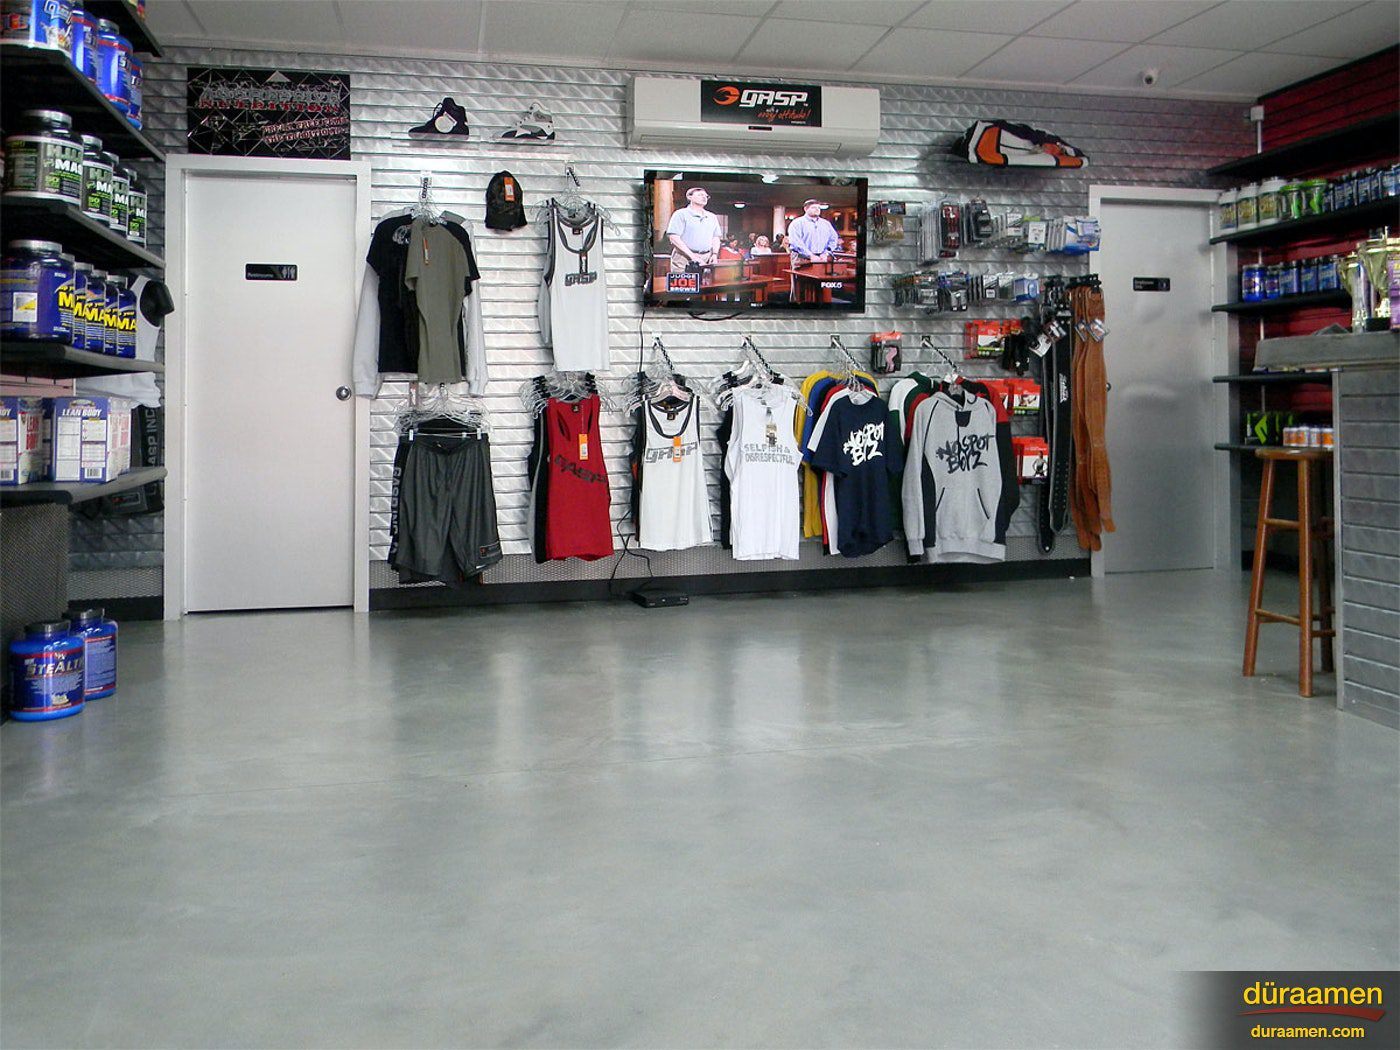 The merchandise of this fitness retailer stands out thanks to the clean smooth contemporary concrete overlay flooring Commercial and Industrial Flooring Solutions Why Epoxy Reigns Supreme | Duraamen Engineered Products Inc